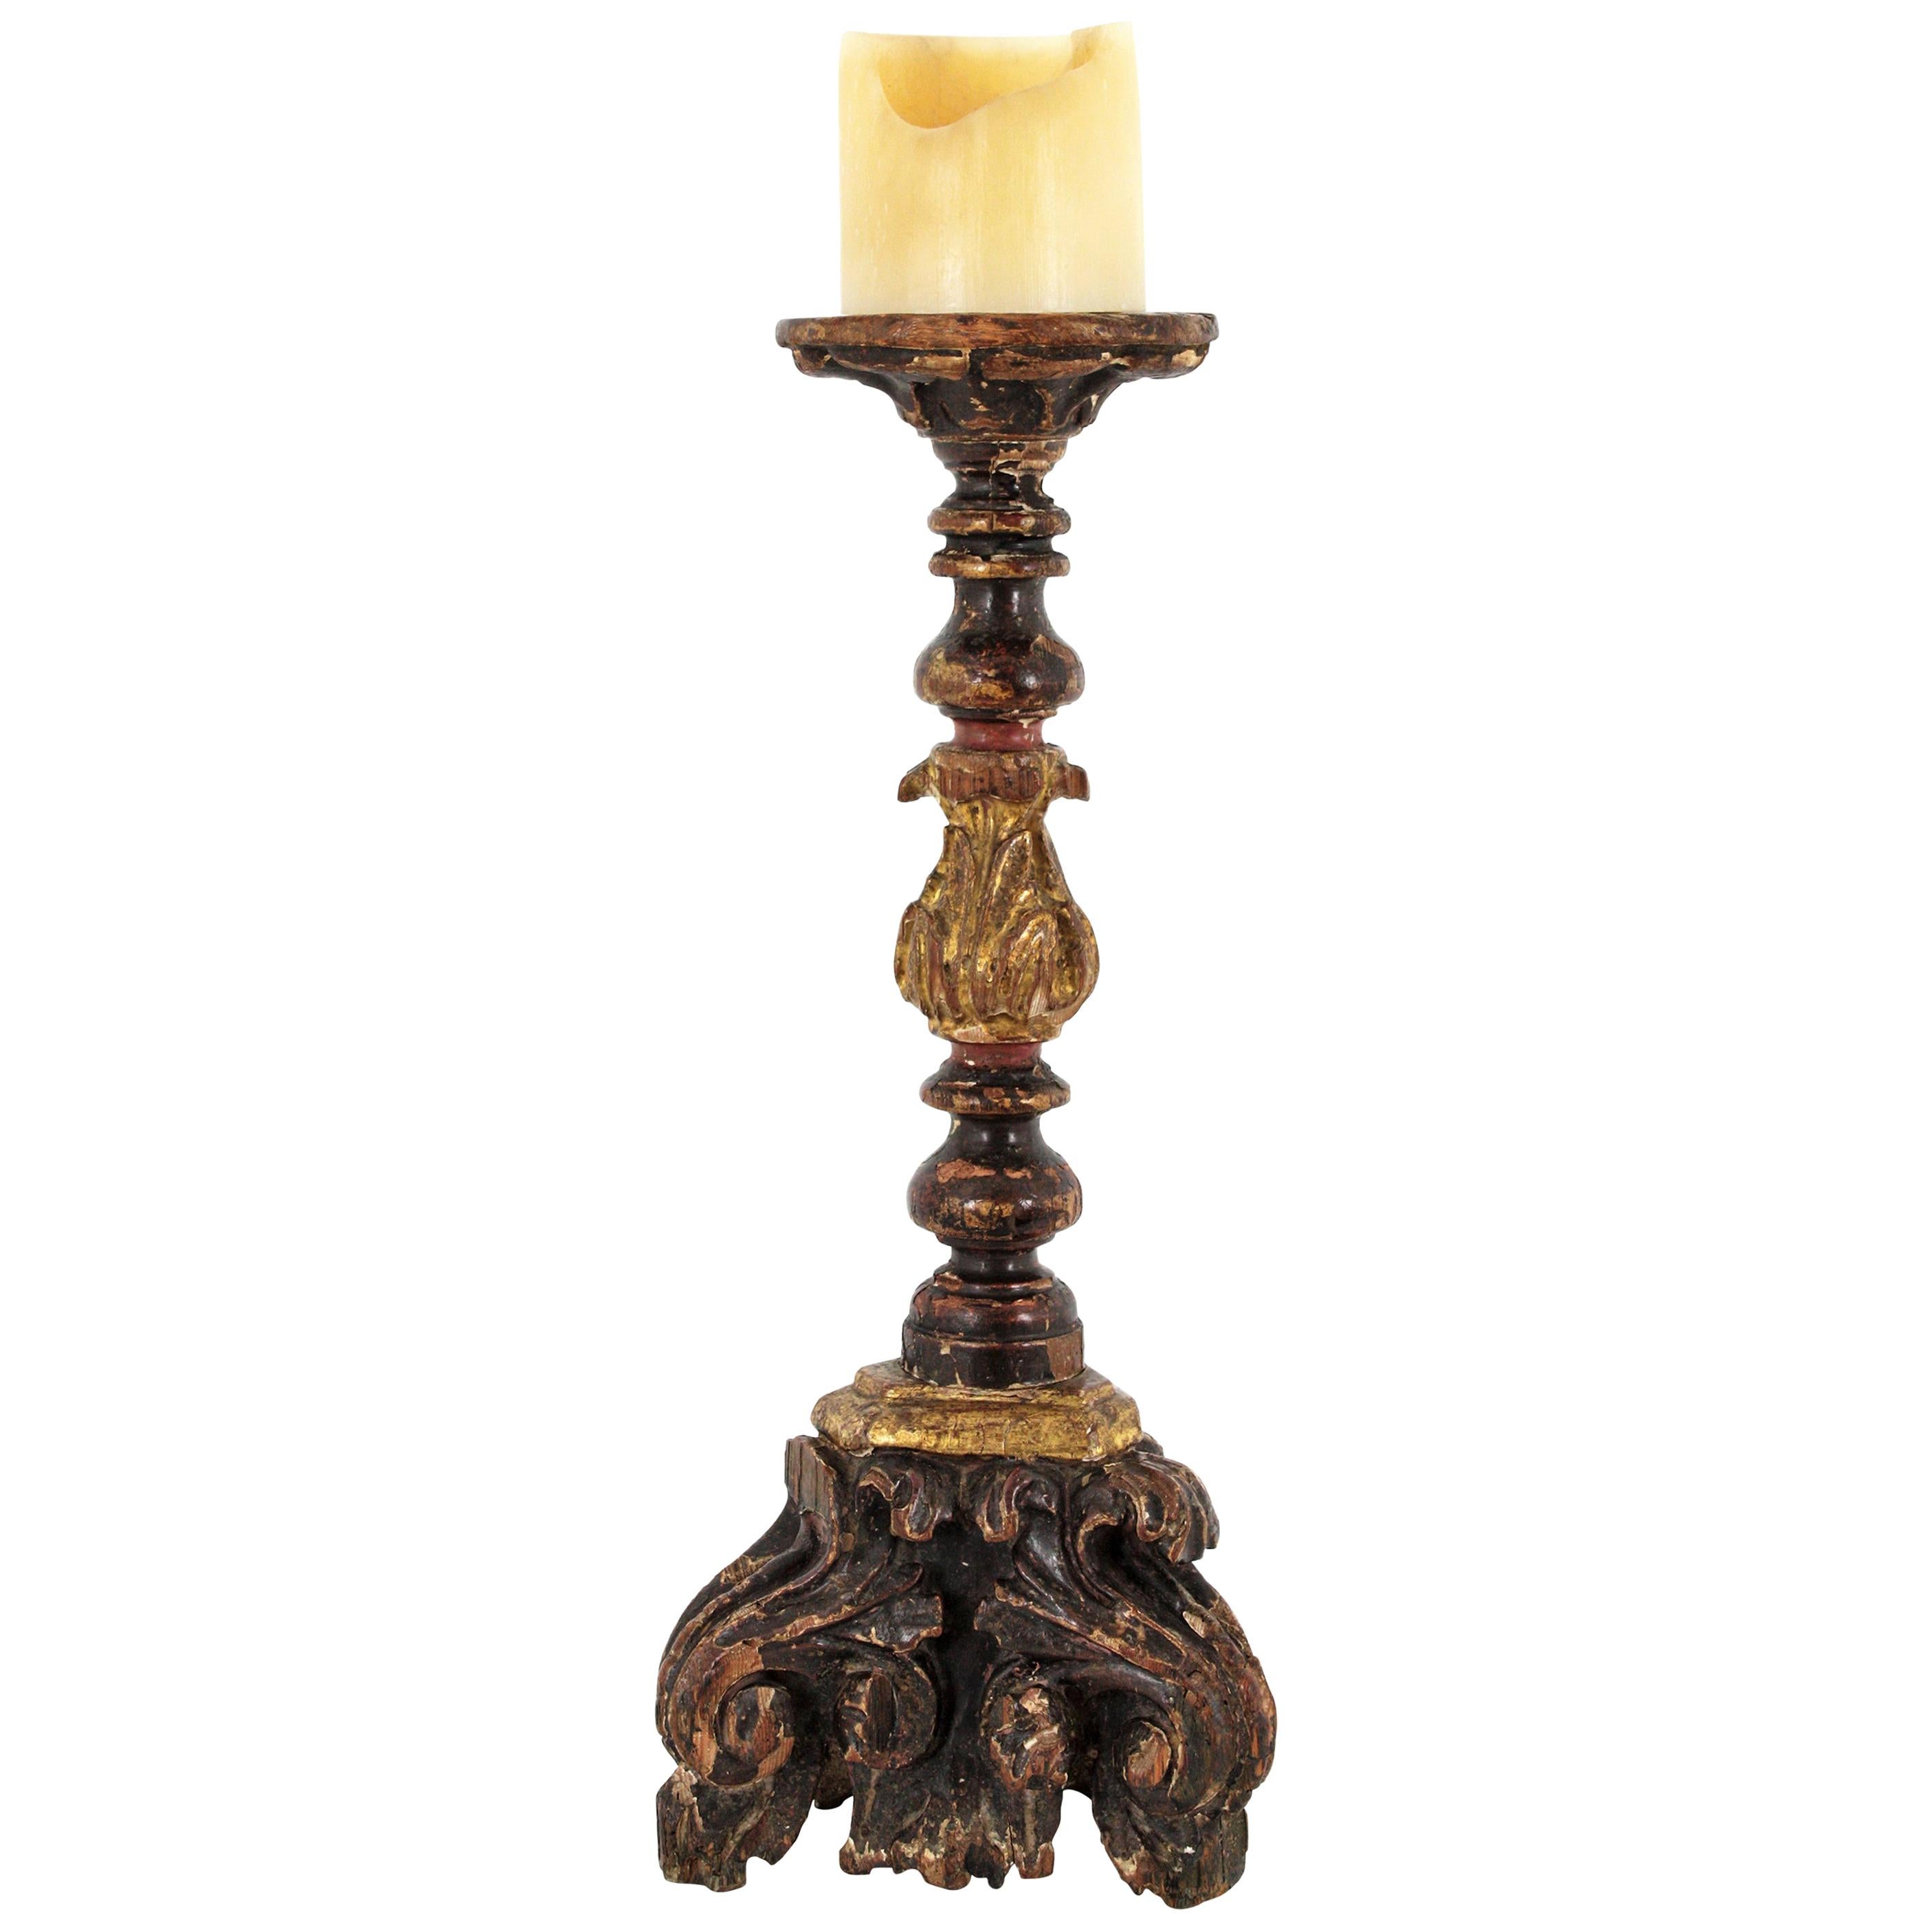 Spanish Baroque Parcel-Gilt Candlestick / Torchère, Carved Wood and Polichromy